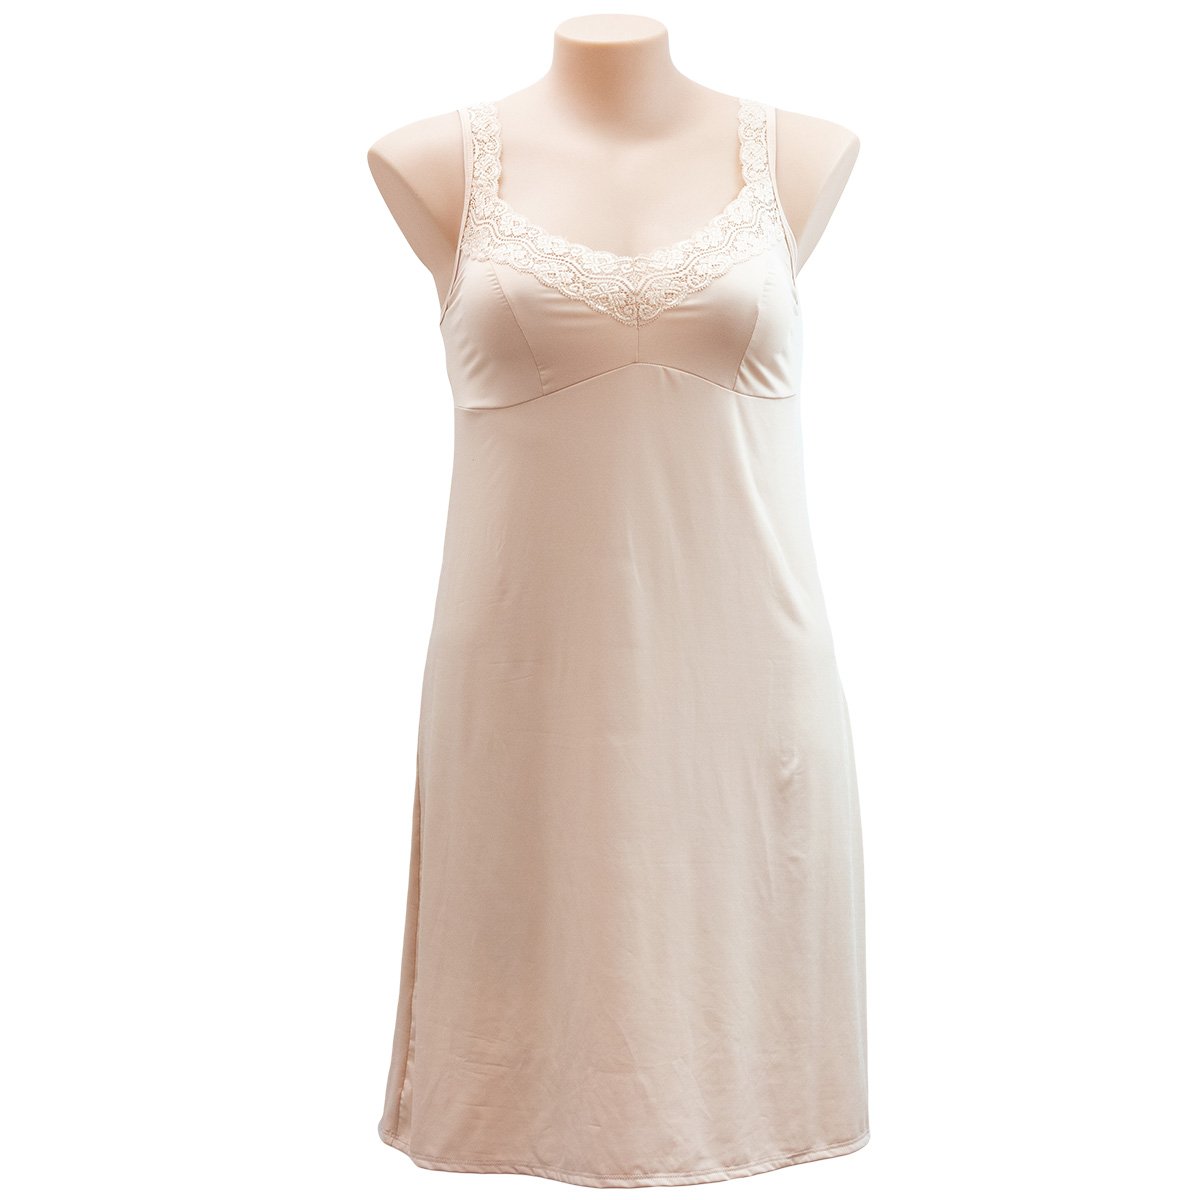 Essence Lace Trim Full Slip 936SL - Dresses & Slips Nude / 10 / S  Available at Illusions Lingerie